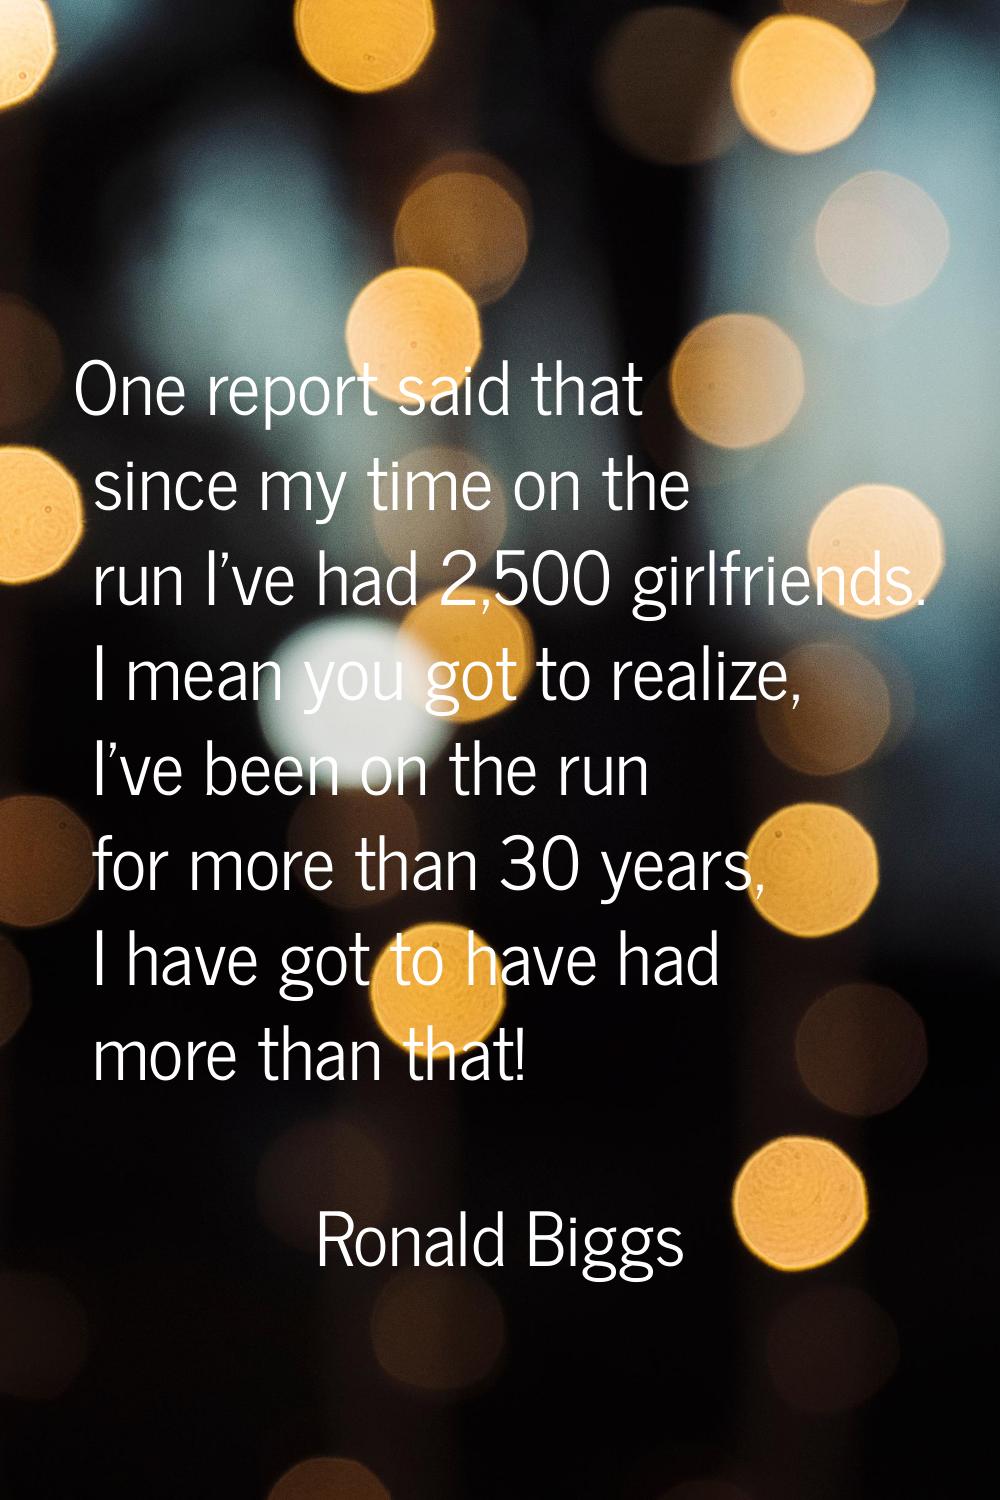 One report said that since my time on the run I've had 2,500 girlfriends. I mean you got to realize